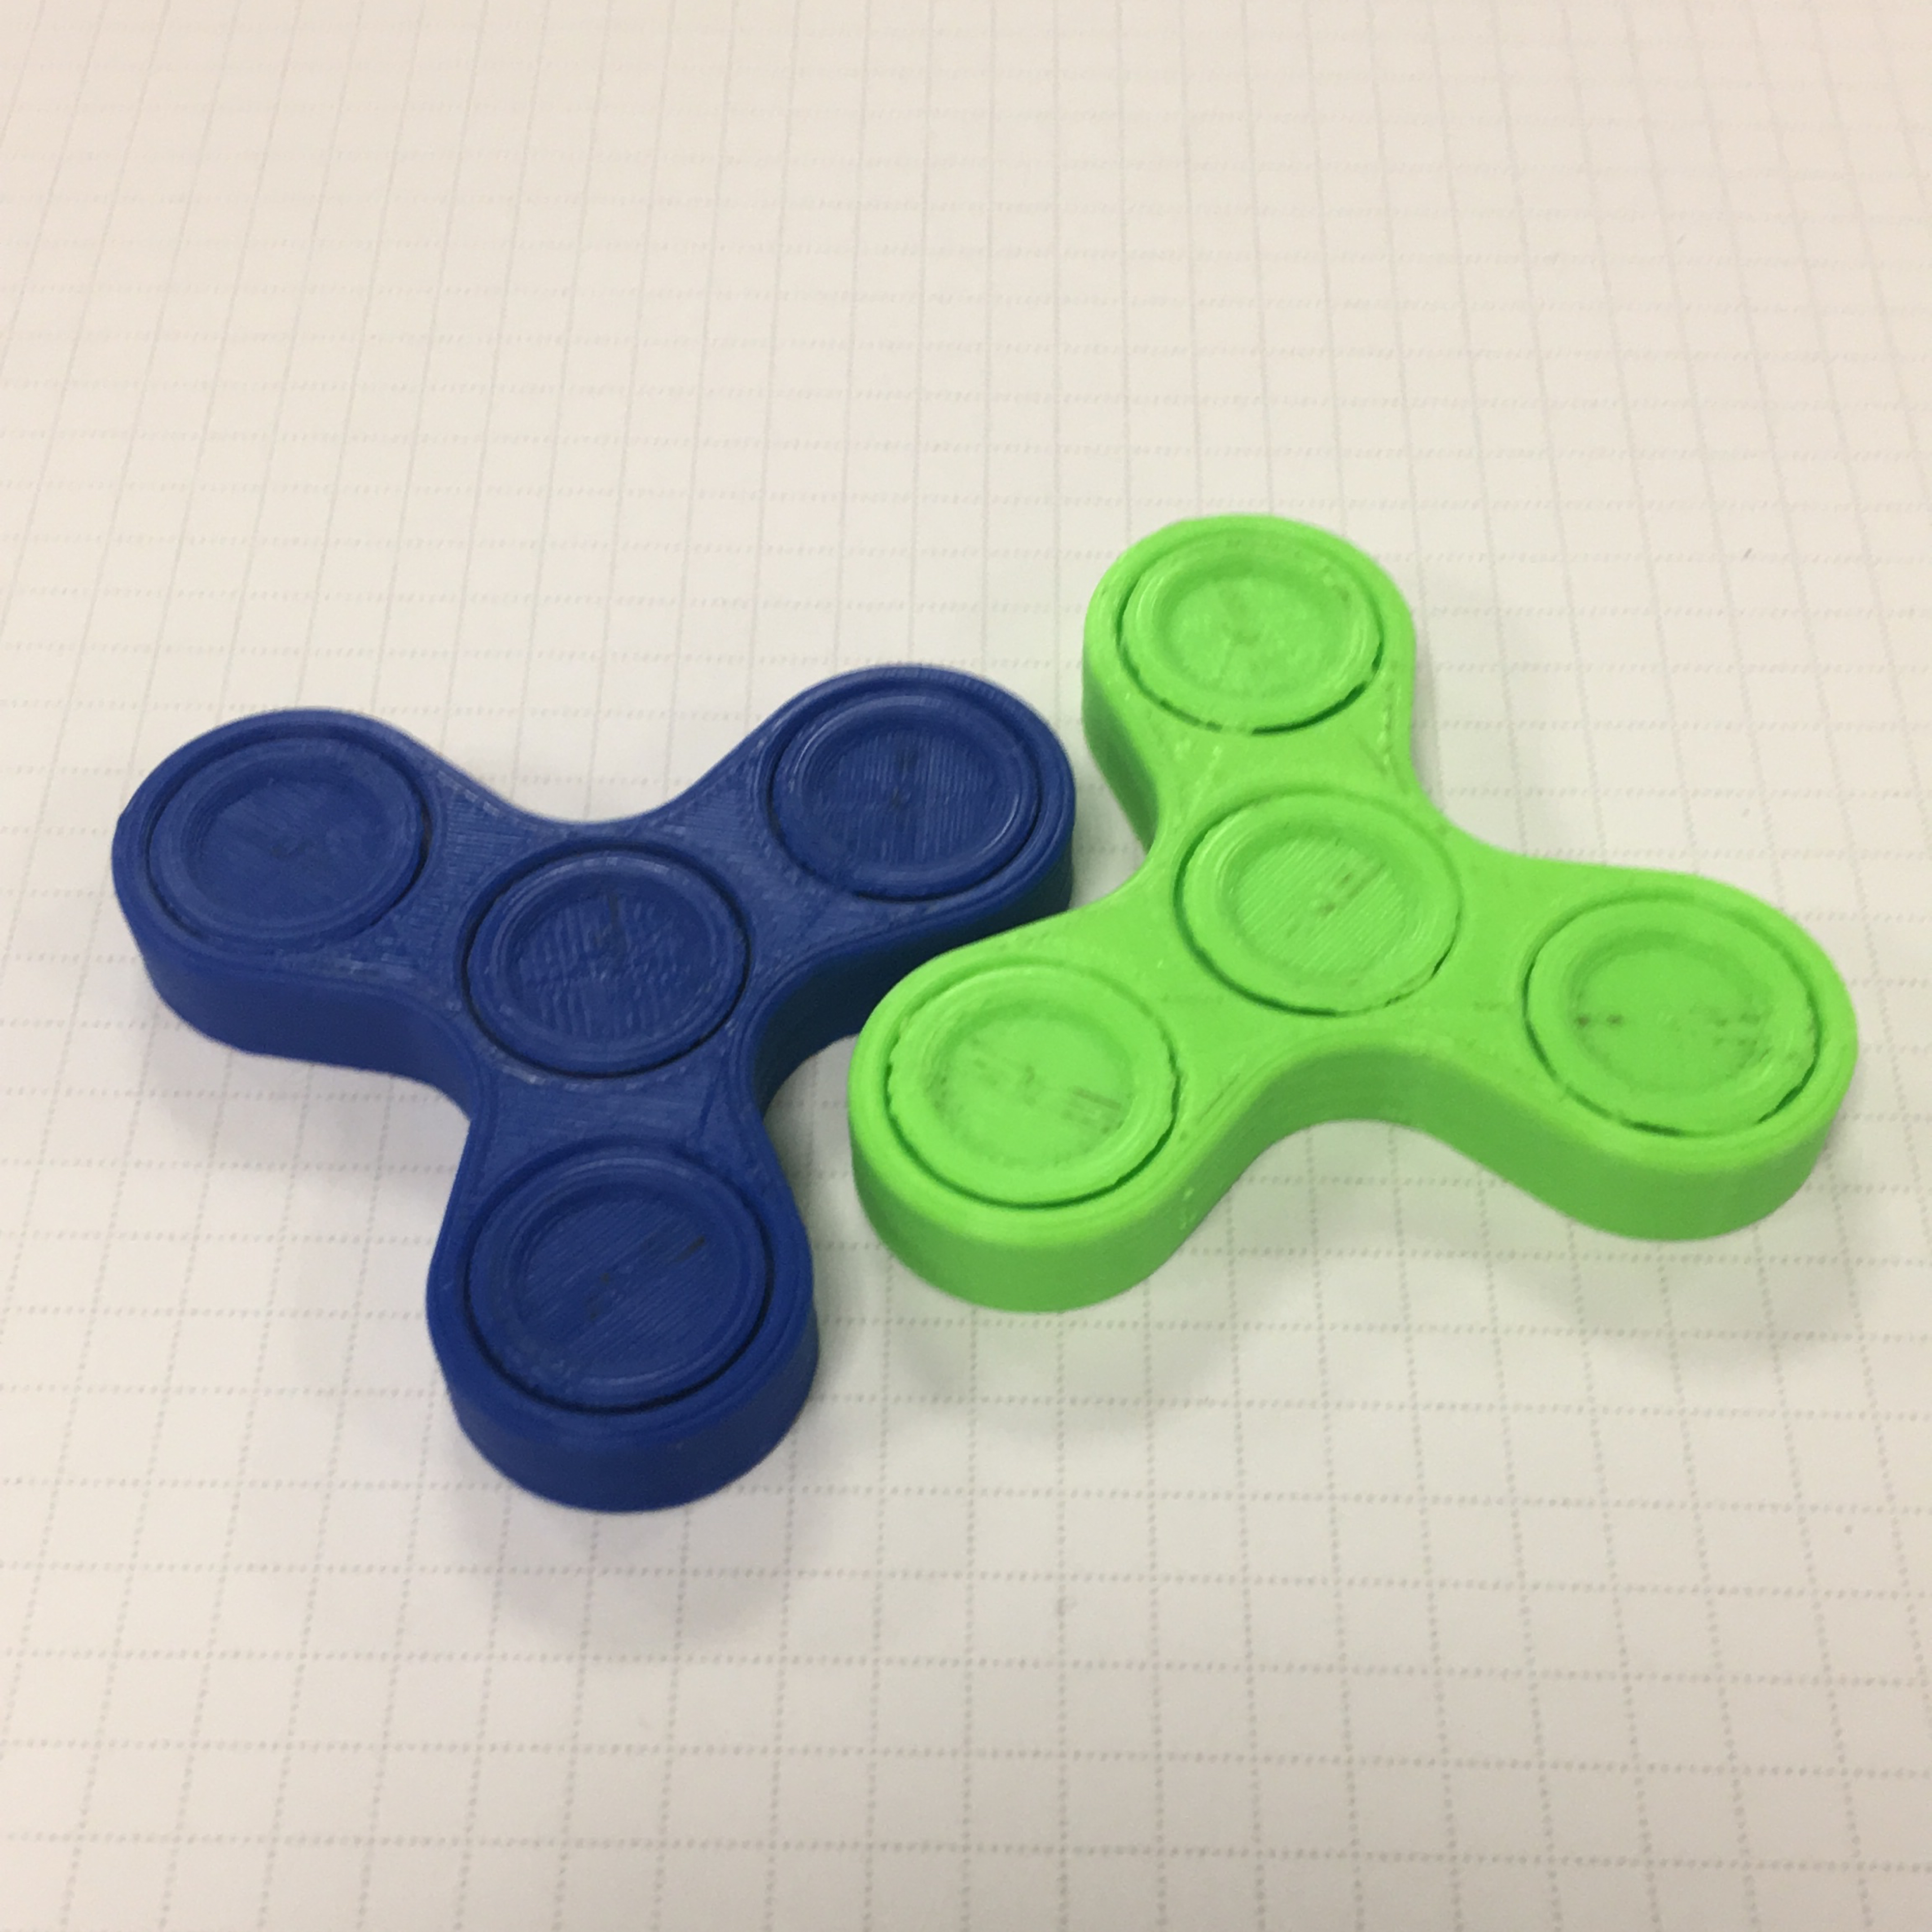 3D Printable Fidget Spinner OnePiecePrint / No Bearings Required